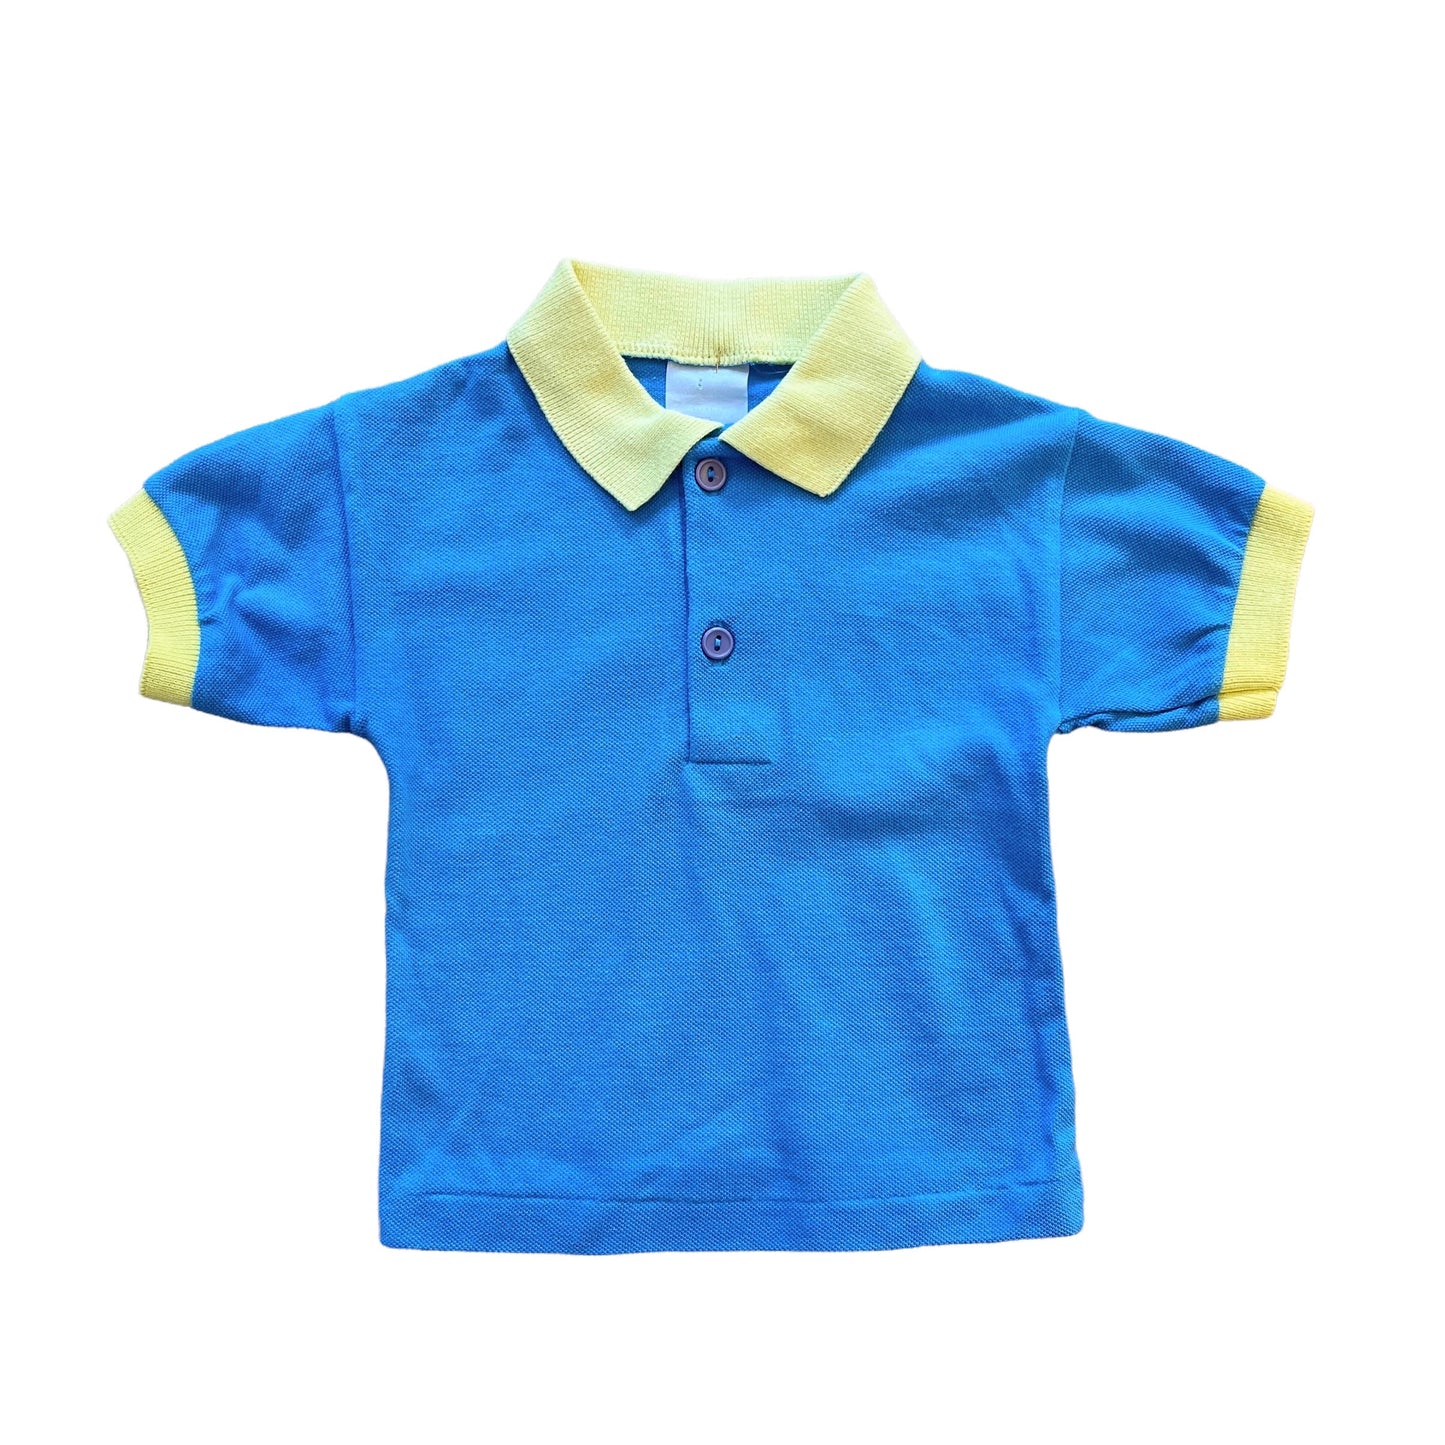 Vintage 70's Turquoise Baby Polo Top / 3-6 Months